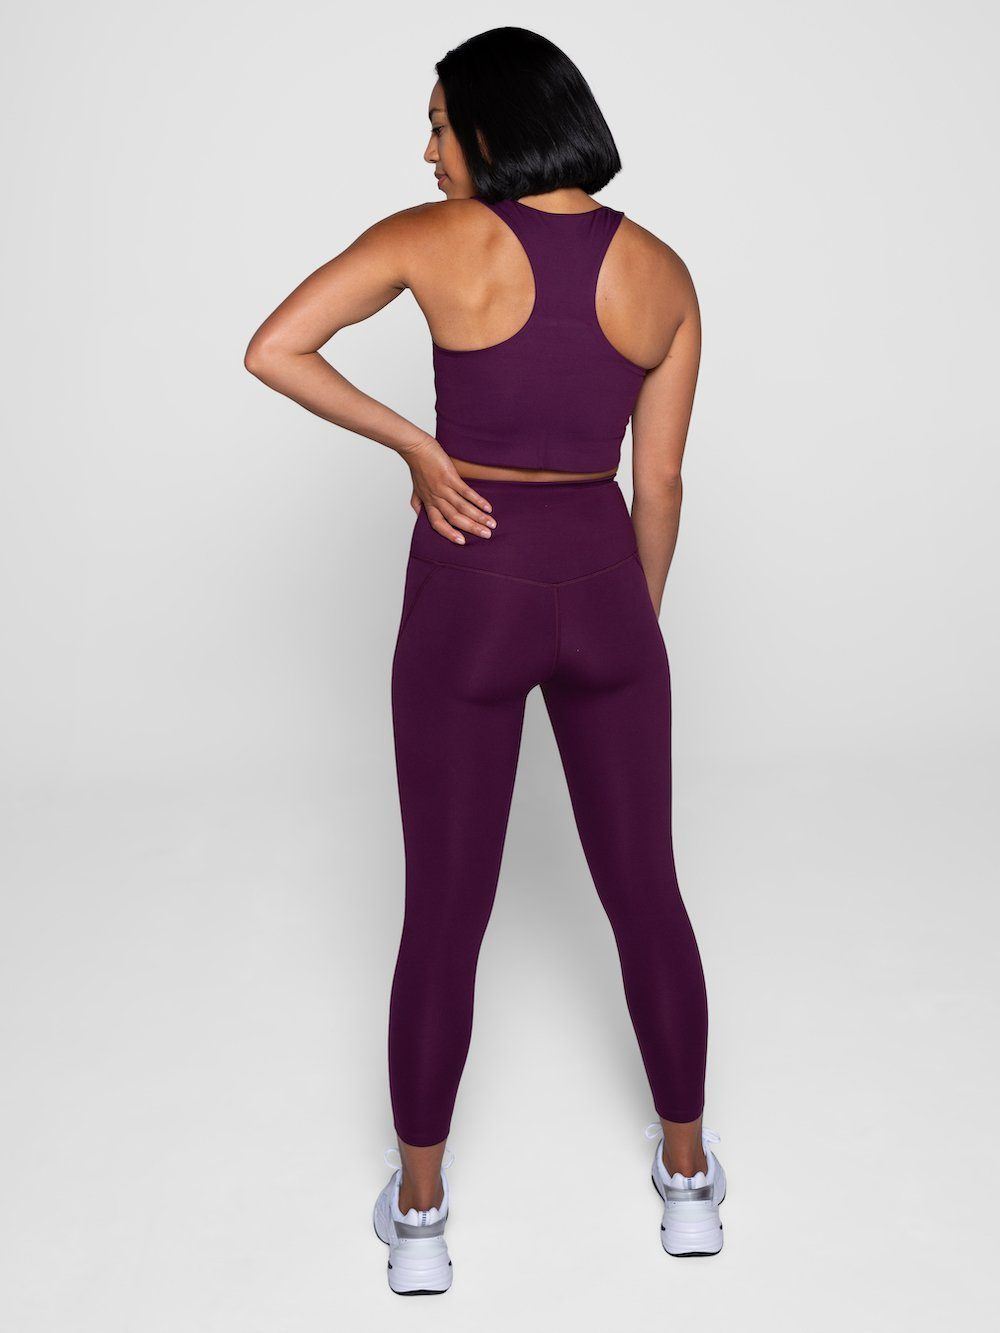 Girlfriend Collective - W's Compressive Legging - Normal - Made From Recycled Plastic Bottles - Weekendbee - sustainable sportswear